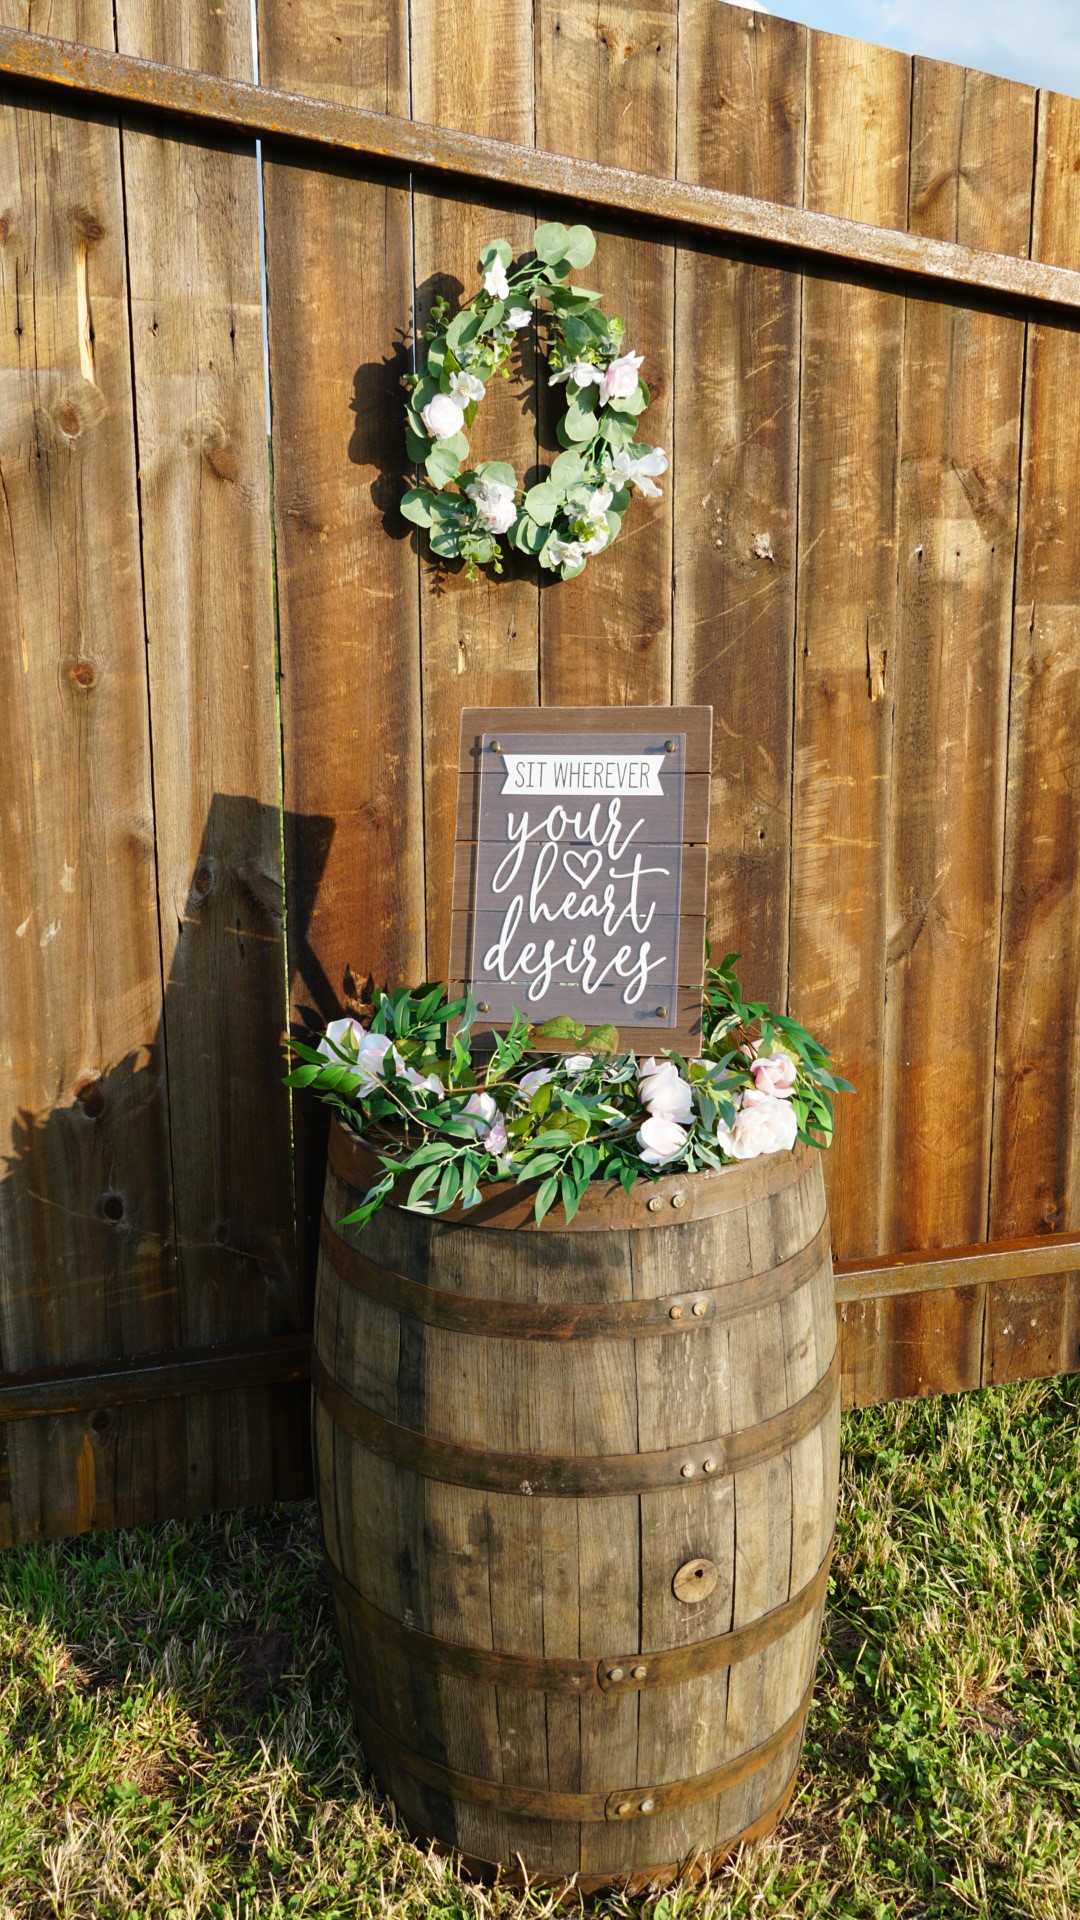 A wooden barrel with flowers and a sign on top of it.